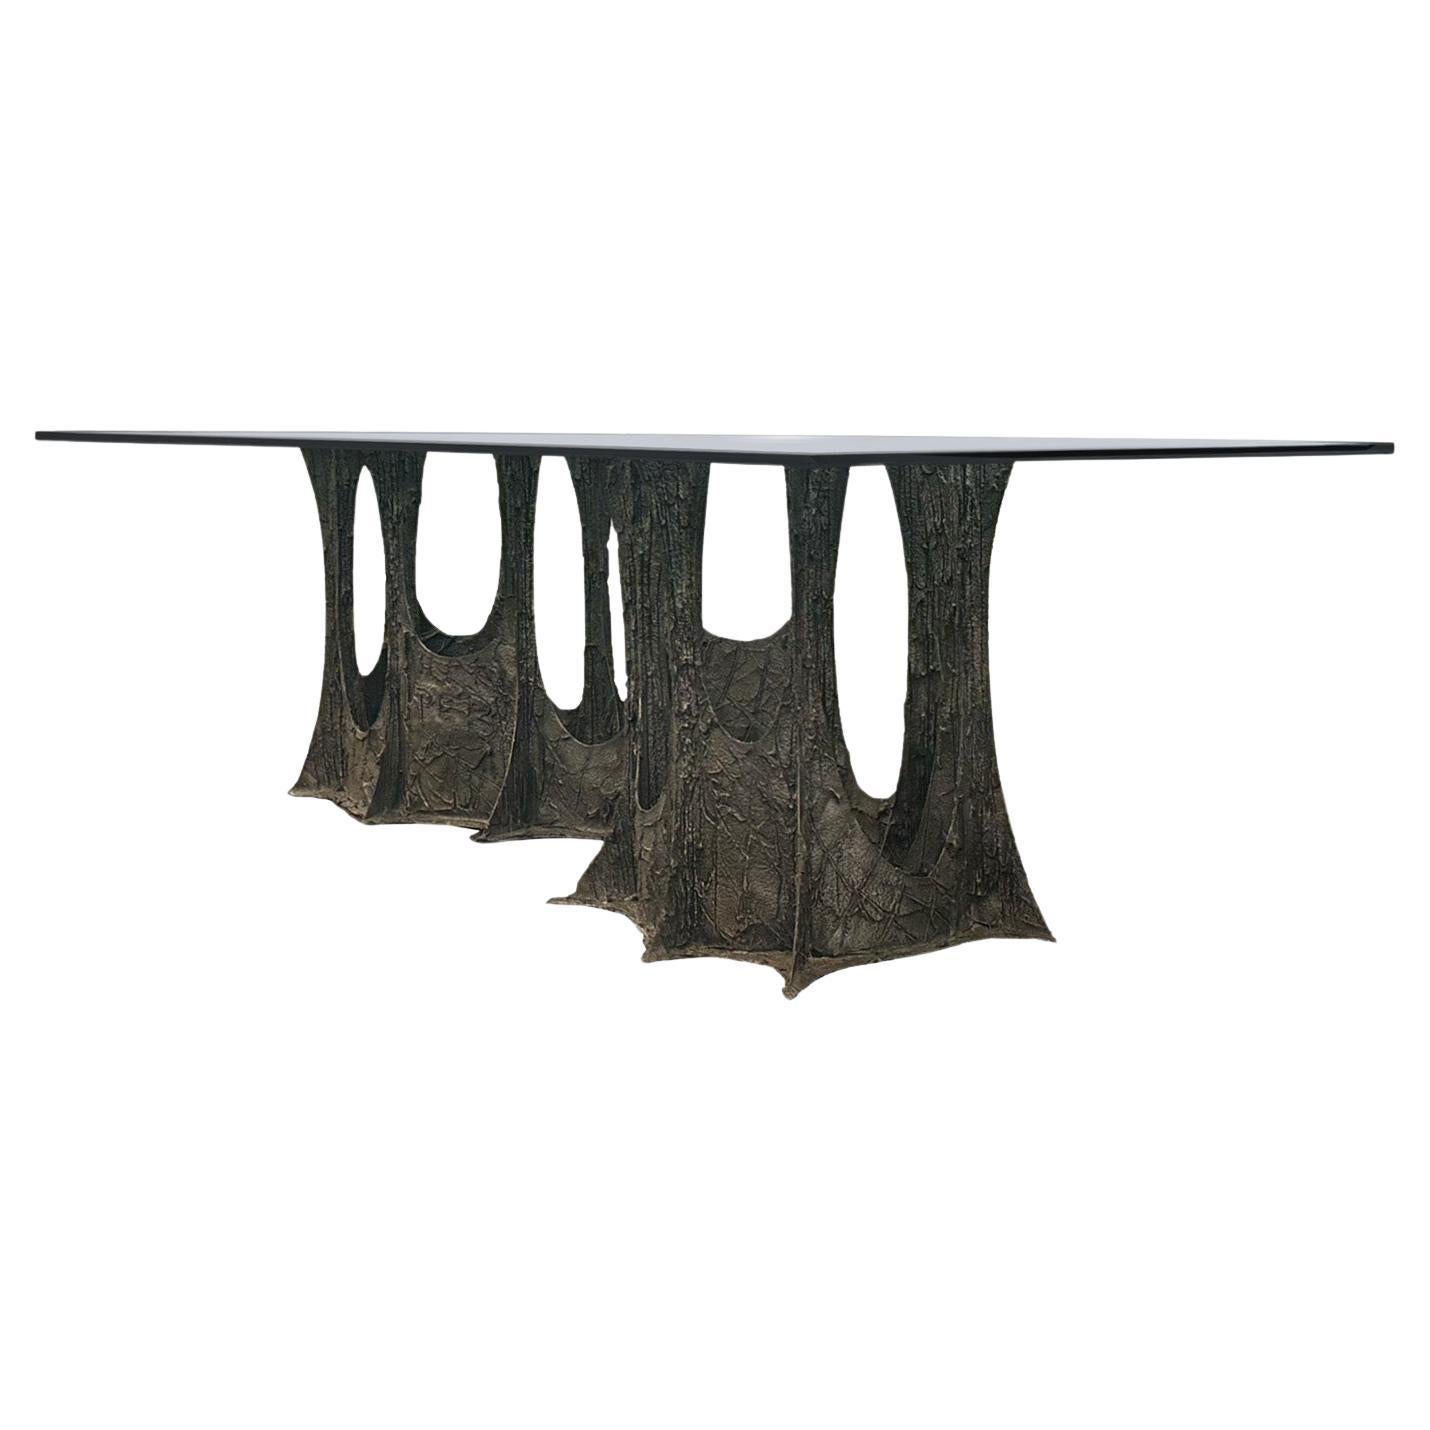 Paul Evans PE 102 Sculpted Bronze Dining Table 1973 (Signed)